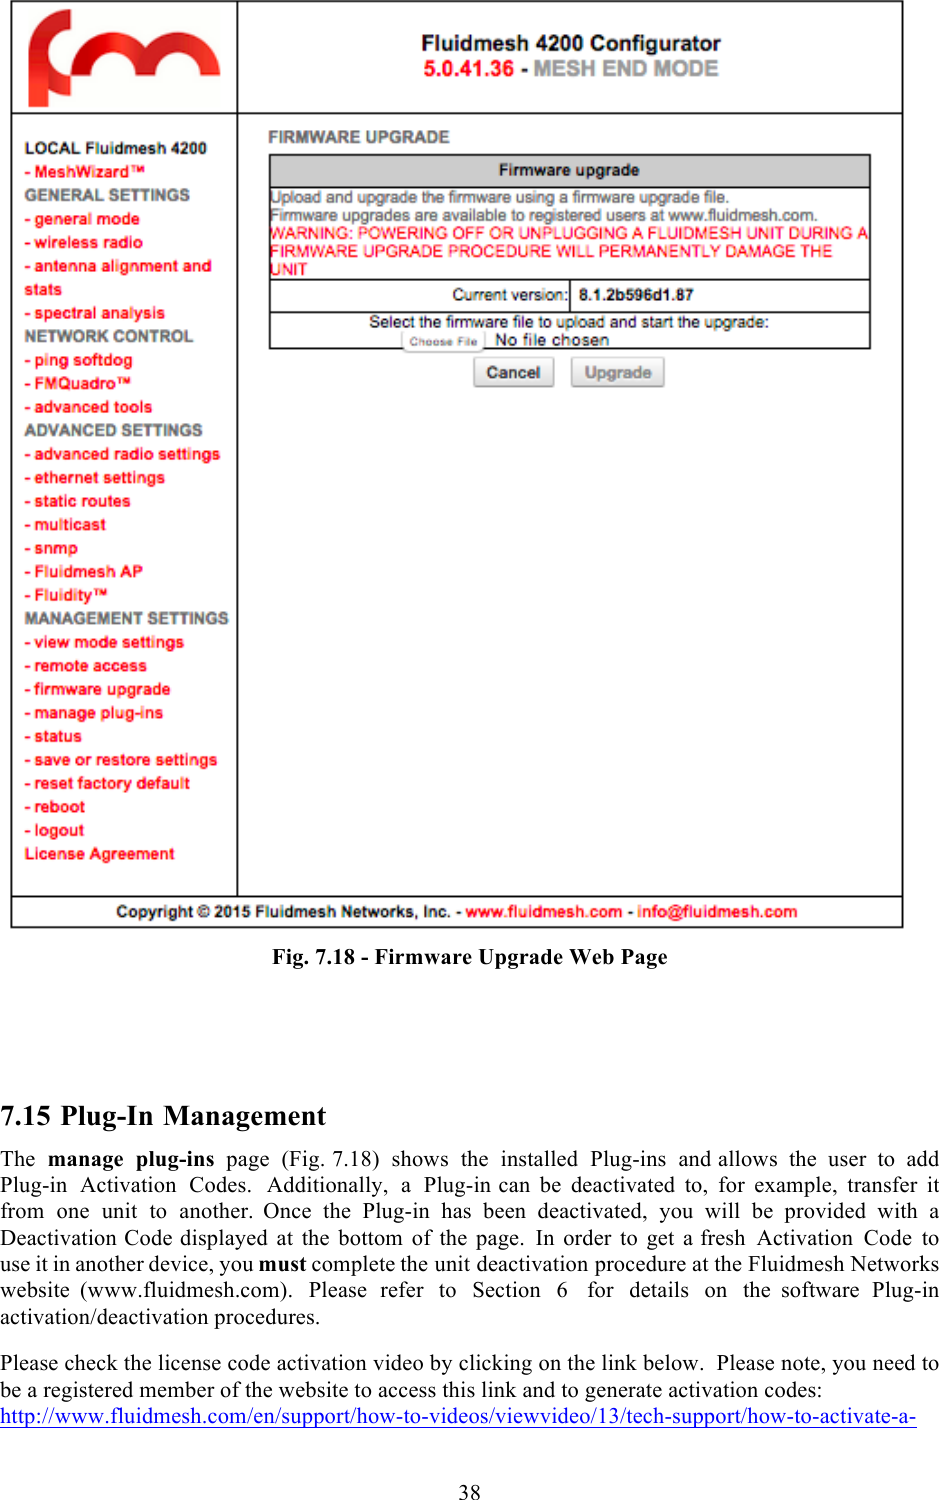  38   Fig. 7.18 - Firmware Upgrade Web Page    7.15 Plug-In Management The manage plug-ins page  (Fig. 7.18)  shows the installed Plug-ins and allows the user to add Plug-in Activation Codes.  Additionally,  a  Plug-in can be deactivated to, for example, transfer it from one unit to another.  Once the Plug-in has been deactivated, you will be provided with a Deactivation Code displayed at the bottom of the page. In order to get a fresh Activation Code to use it in another device, you must complete the unit deactivation procedure at the Fluidmesh Networks website  (www.fluidmesh.com). Please refer to Section  6   for details on the  software Plug-in activation/deactivation procedures.  Please check the license code activation video by clicking on the link below.  Please note, you need to be a registered member of the website to access this link and to generate activation codes: http://www.fluidmesh.com/en/support/how-to-videos/viewvideo/13/tech-support/how-to-activate-a-